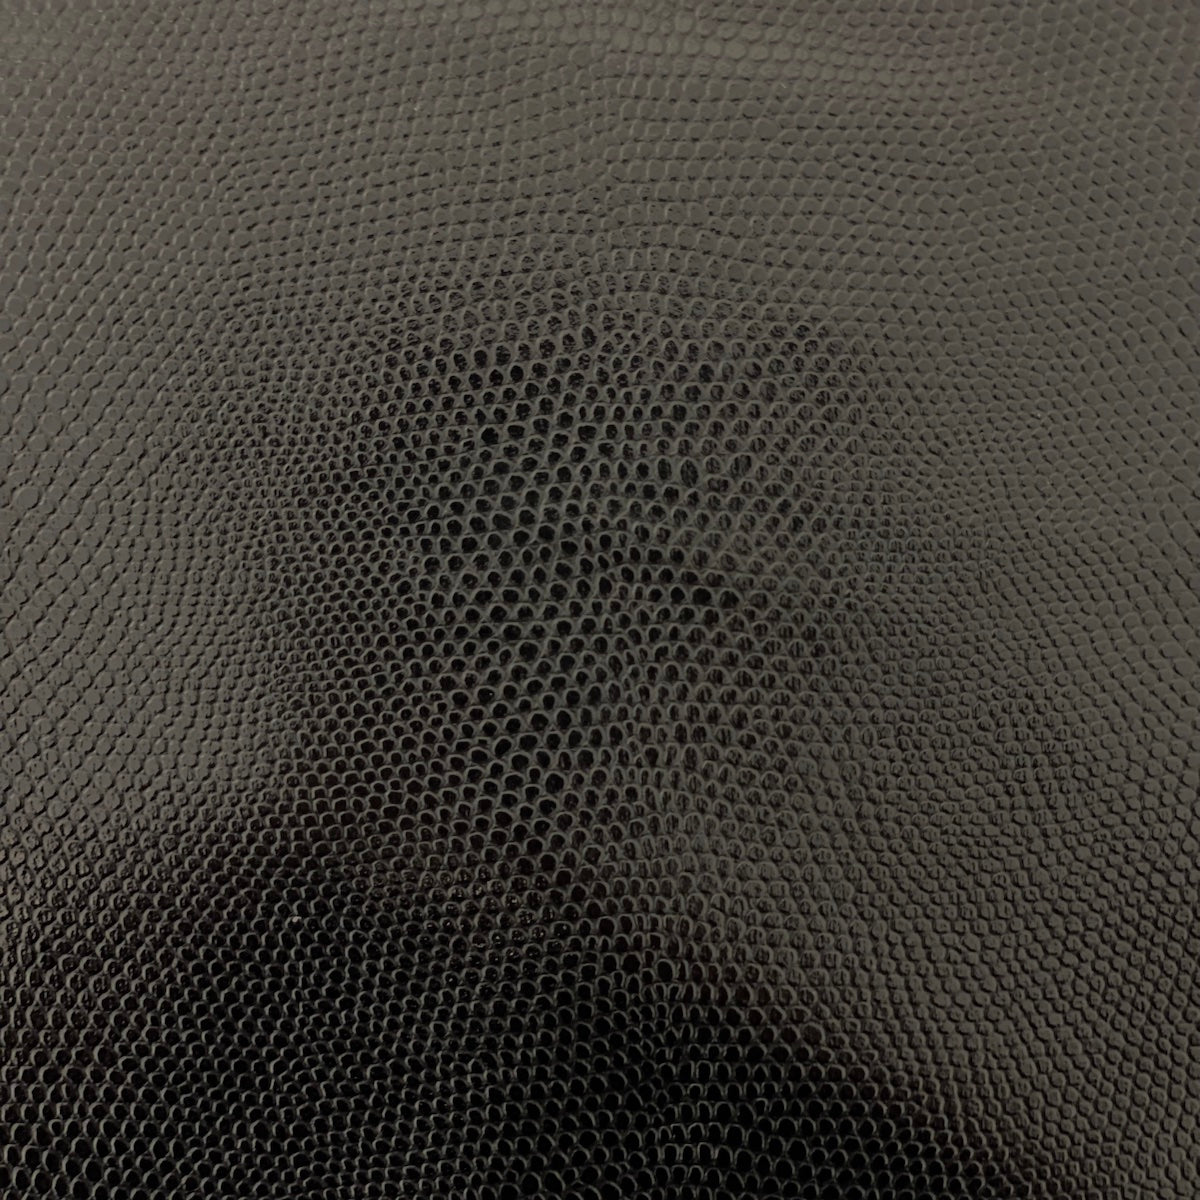 Matte Black or White Vegan Leather Fabric for Upholstery Faux Leather  Fabric in Lambskin Pattern 